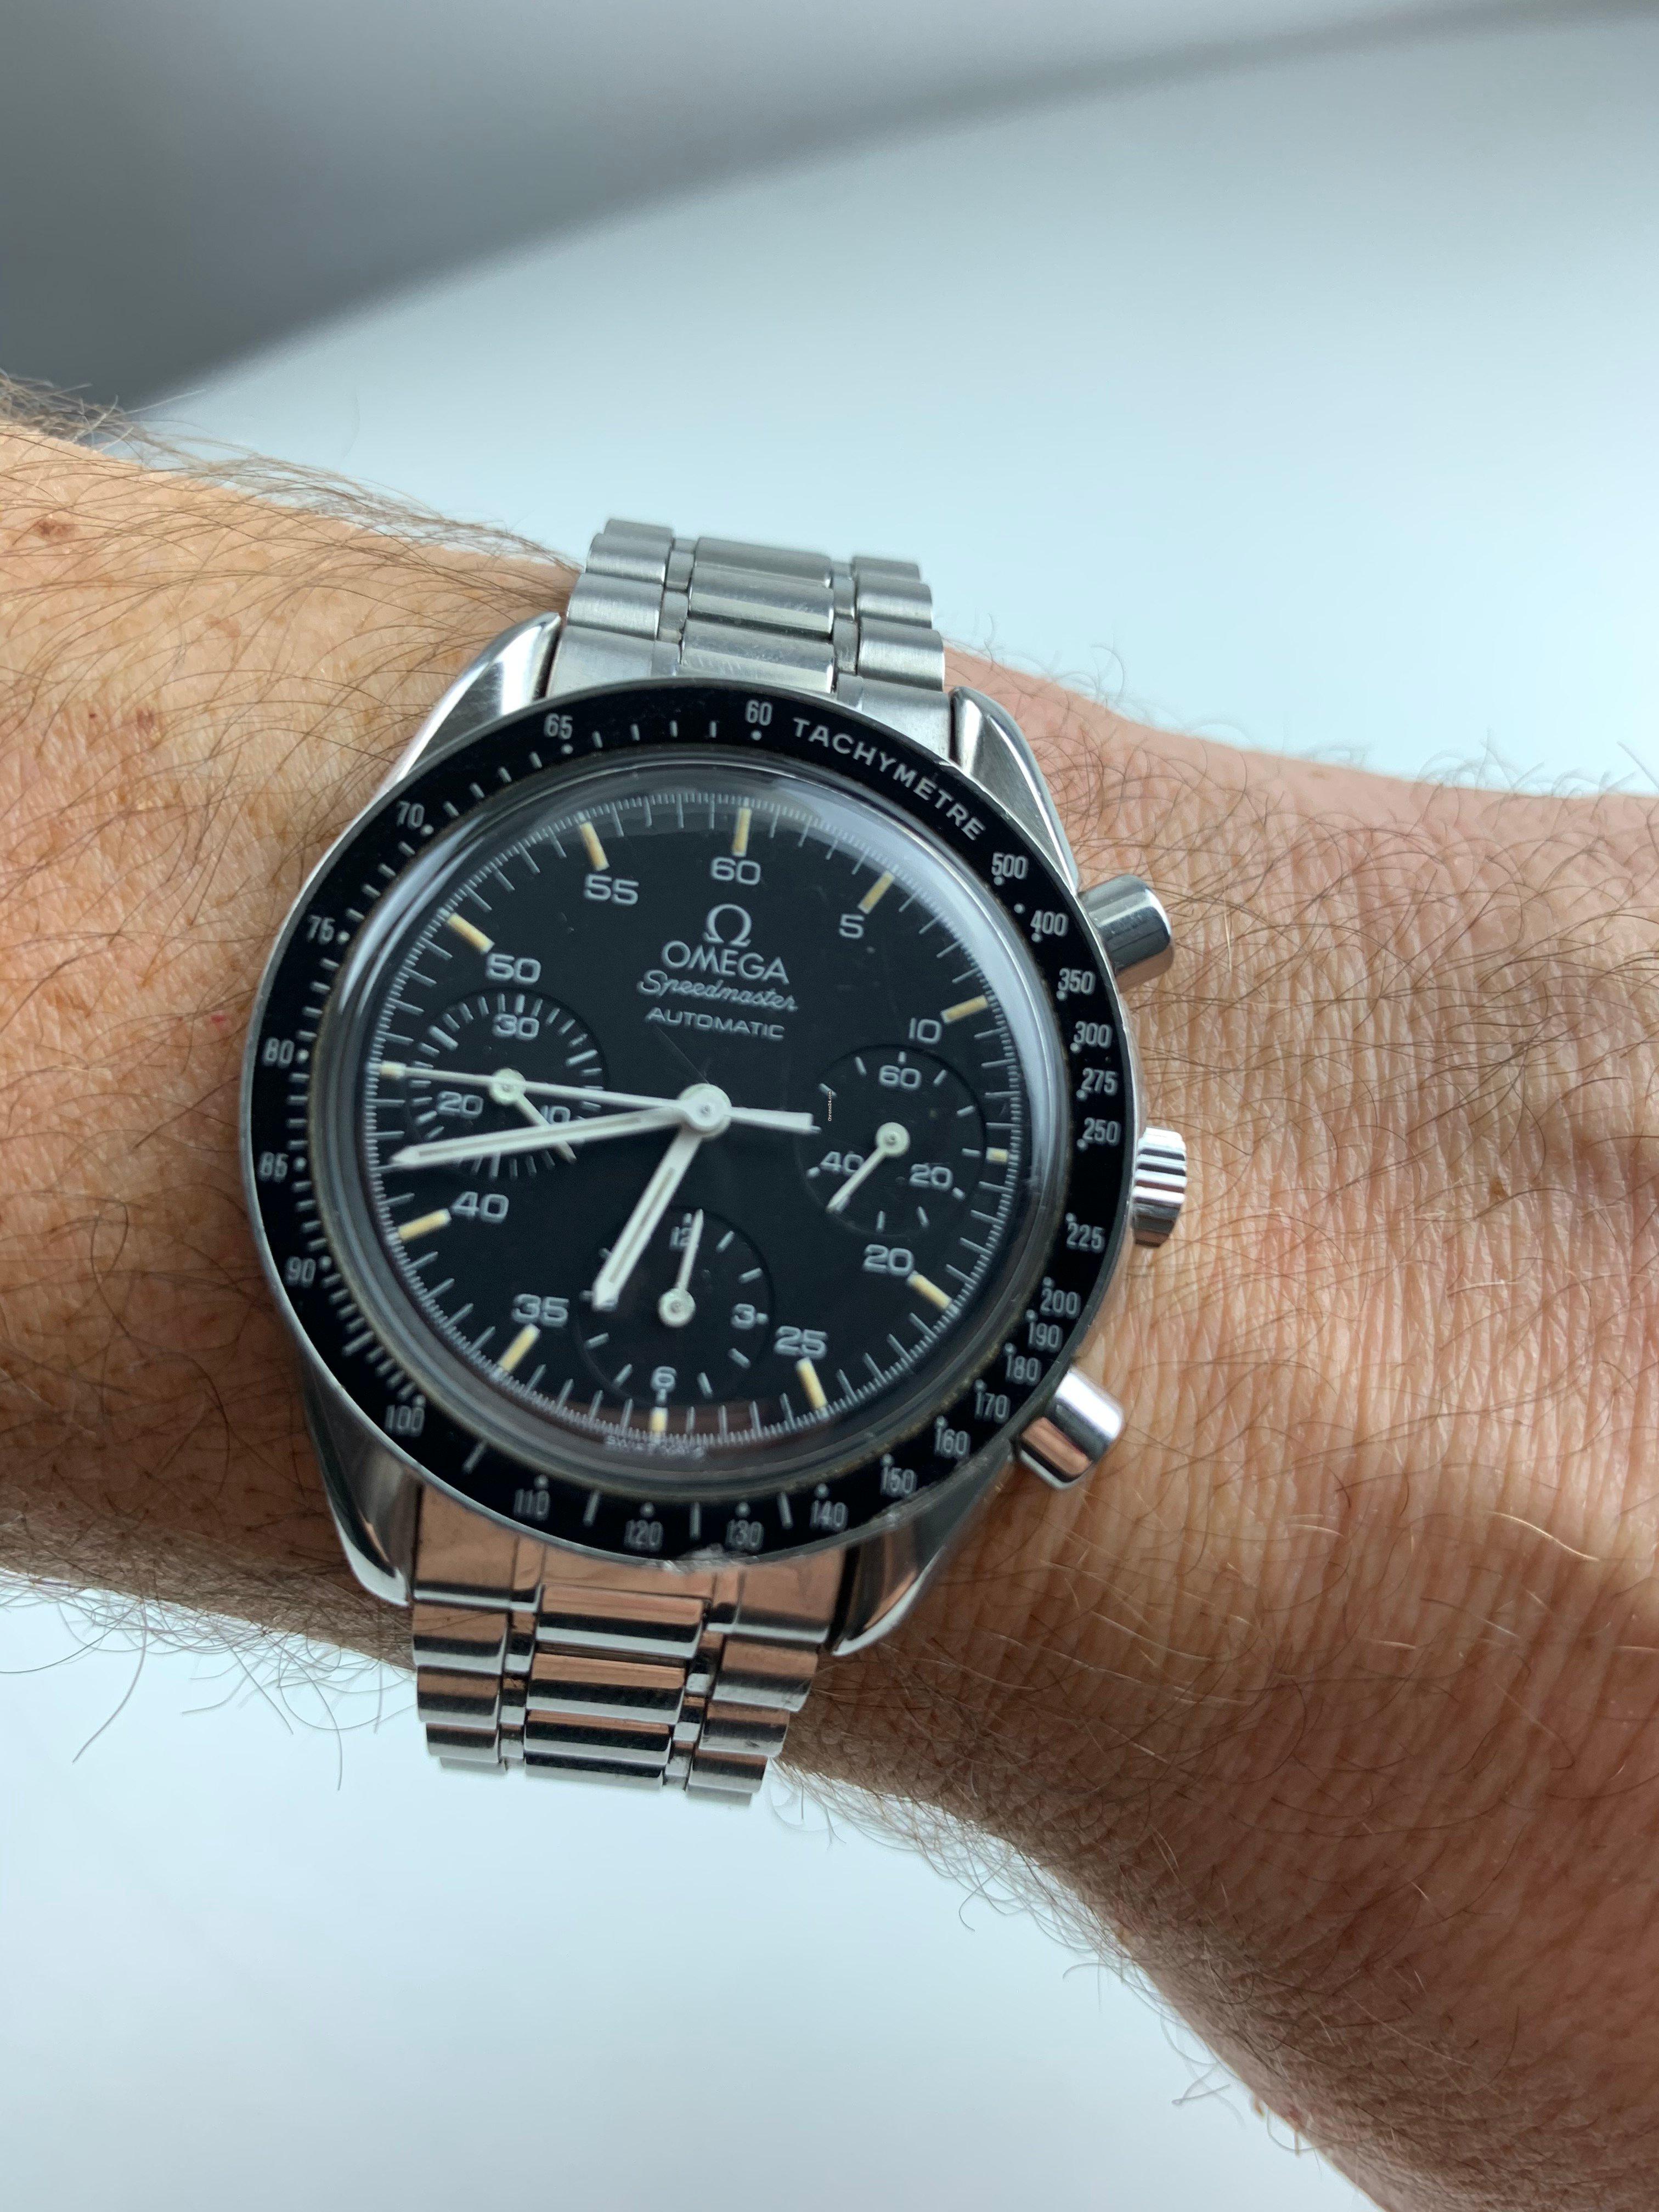 Omega Speedmaster Reduced Men's Watch. 3510.50.00
Great classic watch. In good condition for its age with nice vintage patina.
Small scratch to the bezel as expected but overall fantastic character. 
Year of Production 1998.
Steel case, steel